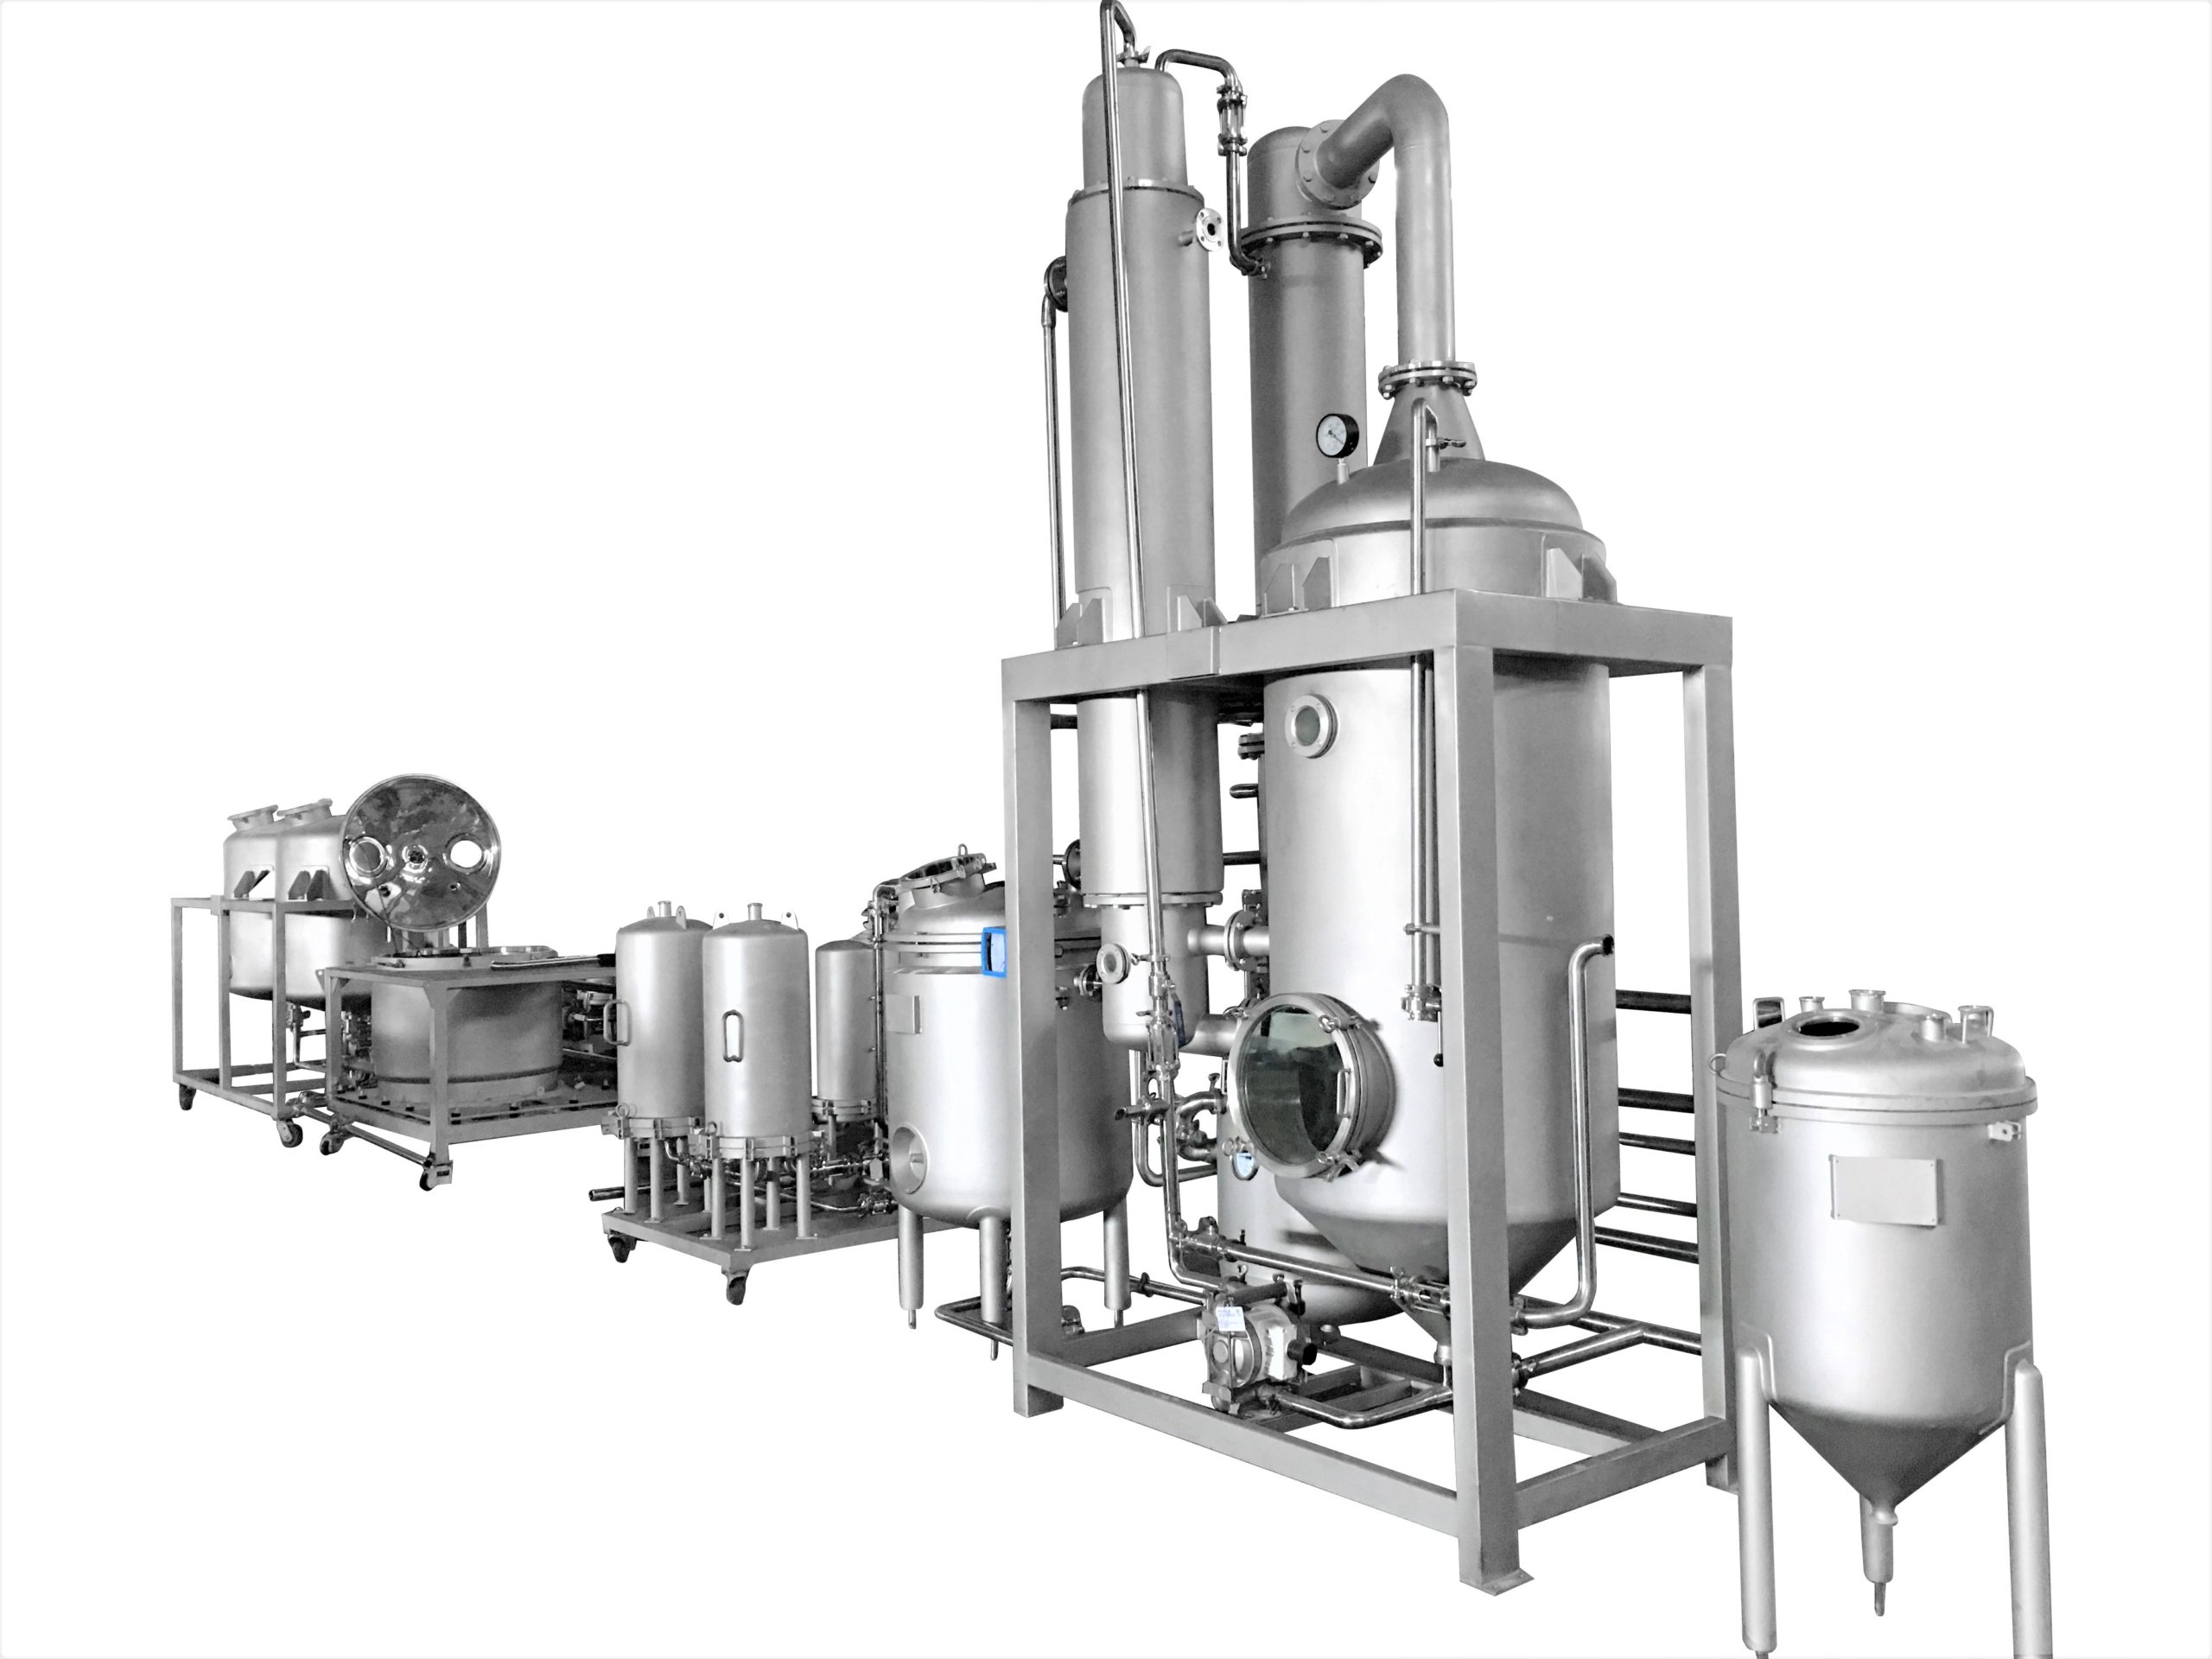 https://cedarstoneindustry.com/wp-content/uploads/2020/06/ethanol-extraction-system-cleaned-1-scaled.jpg